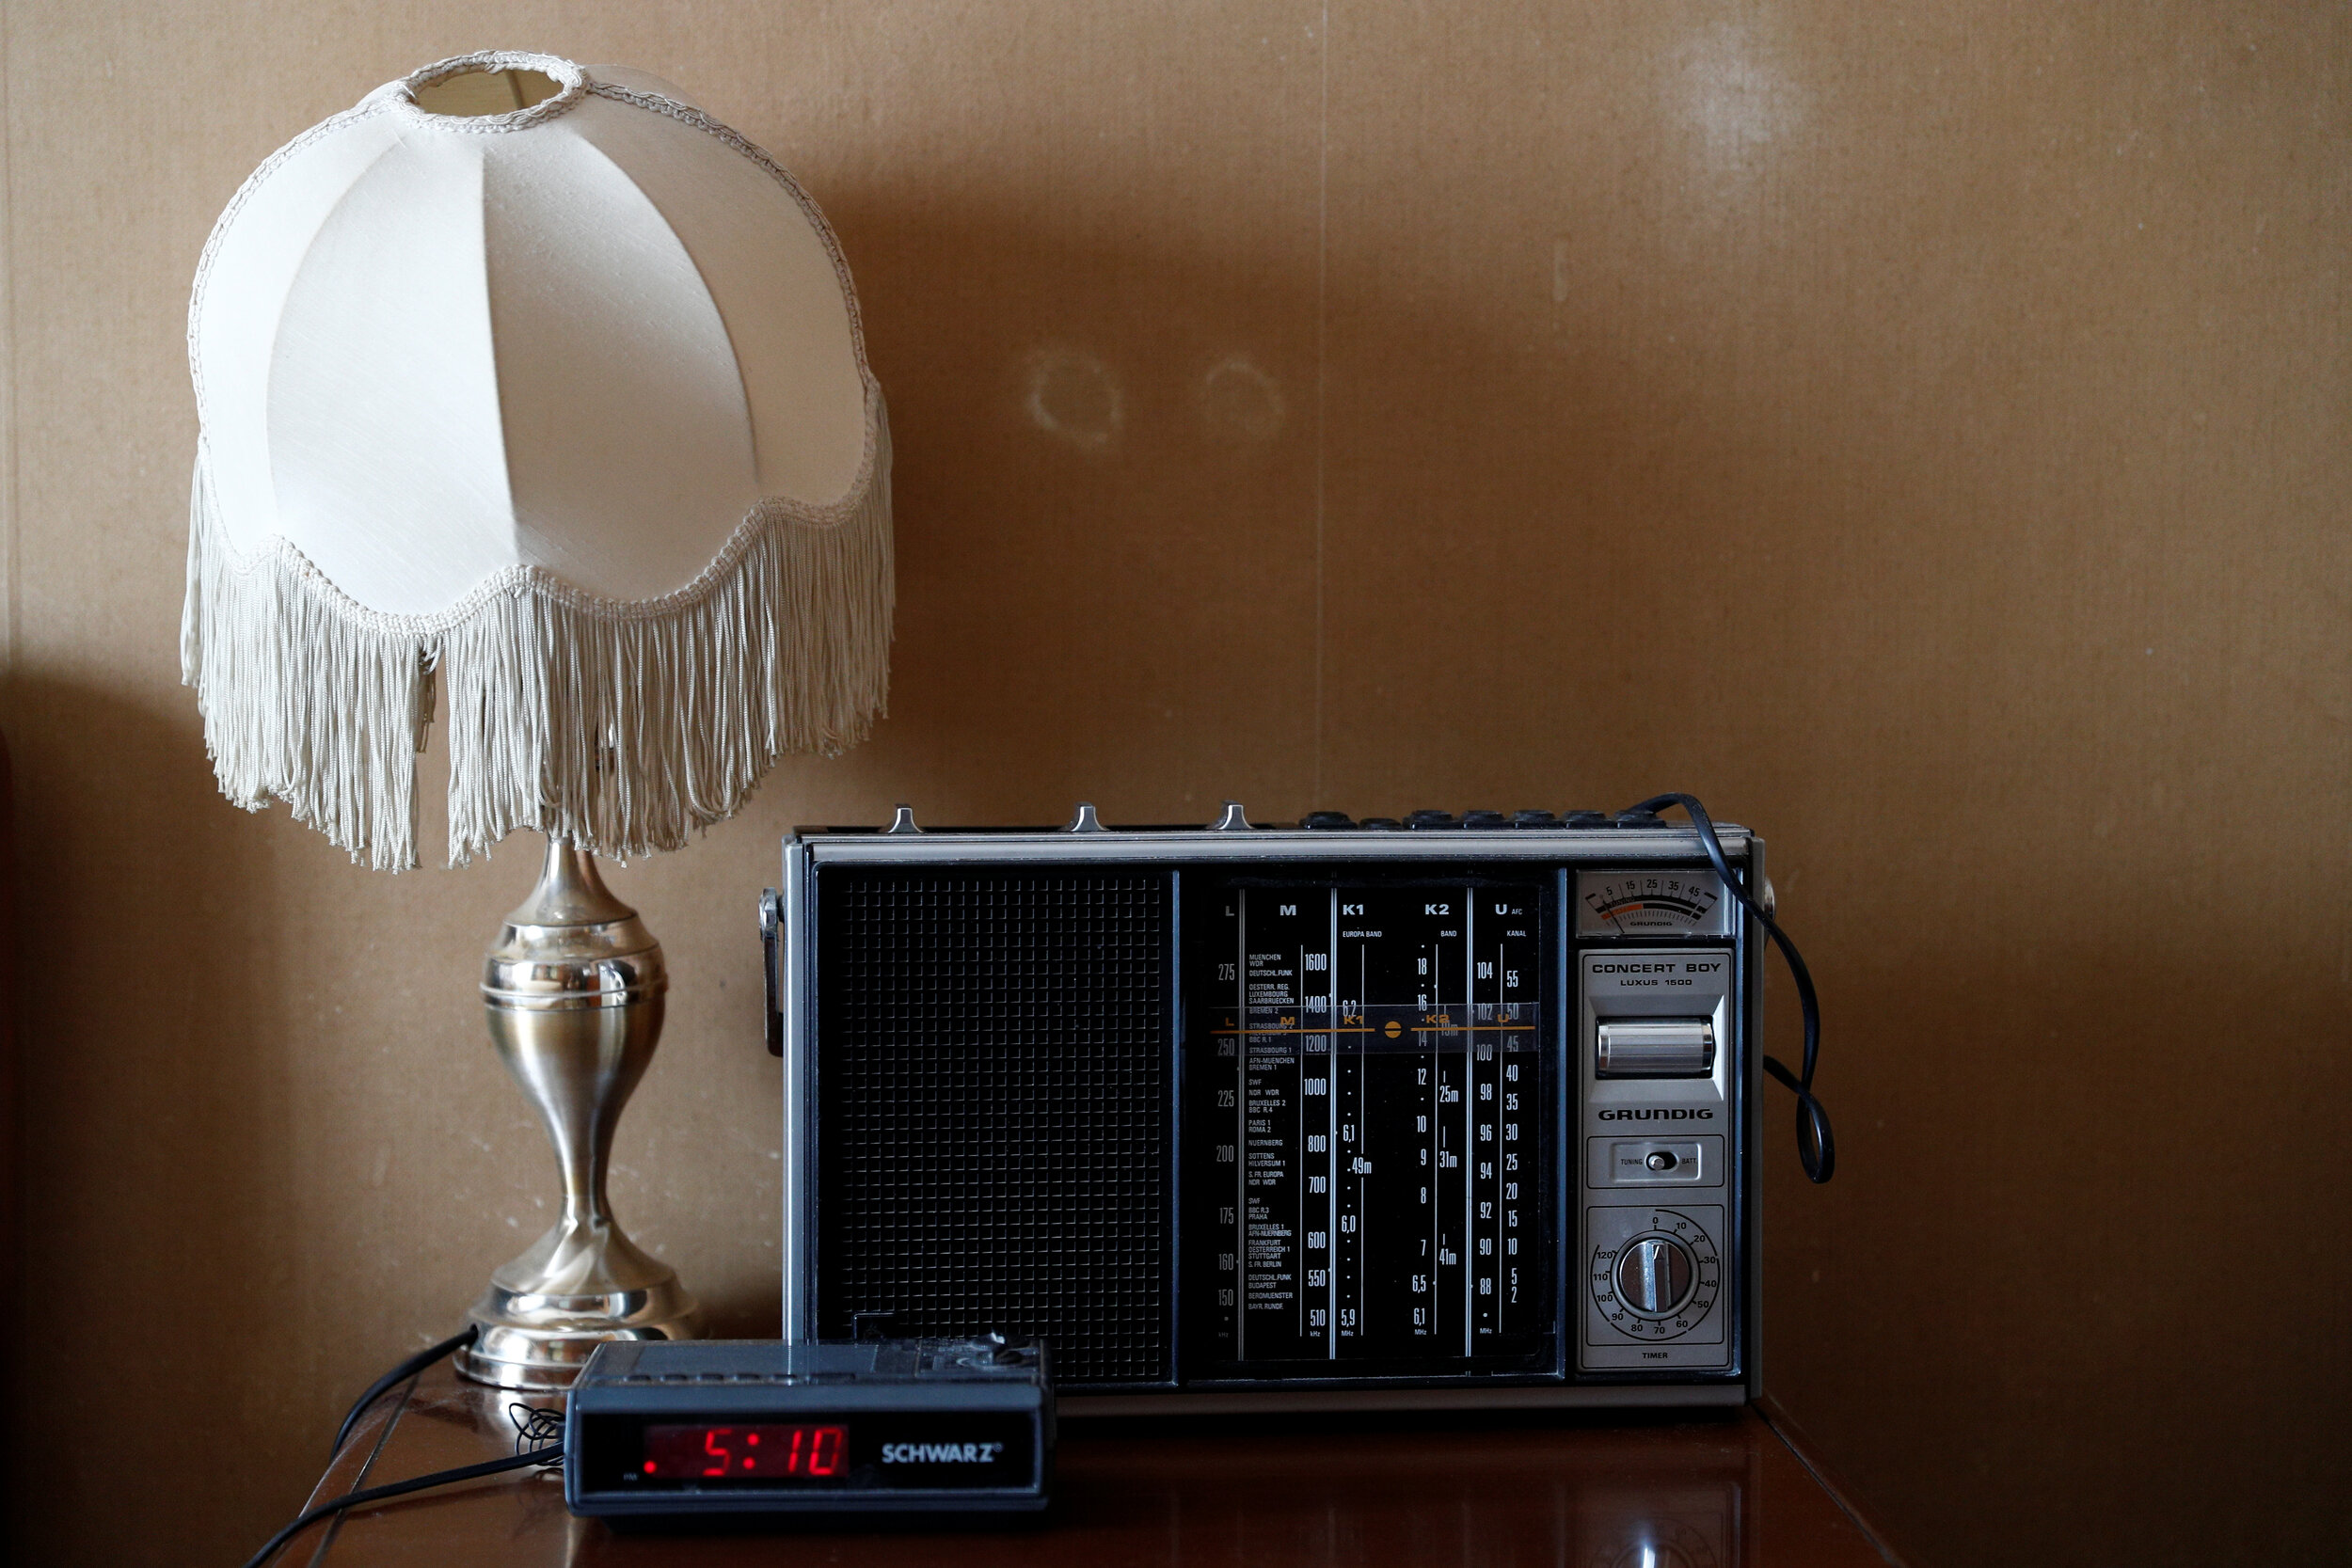  Vintage radios sit on the bedside table of Giuseppe Paterno, 96, Italy's oldest student, a day before he graduates from The University of Palermo with an undergraduate degree in history and philosophy, at his home in Palermo, Italy, July 28, 2020. 